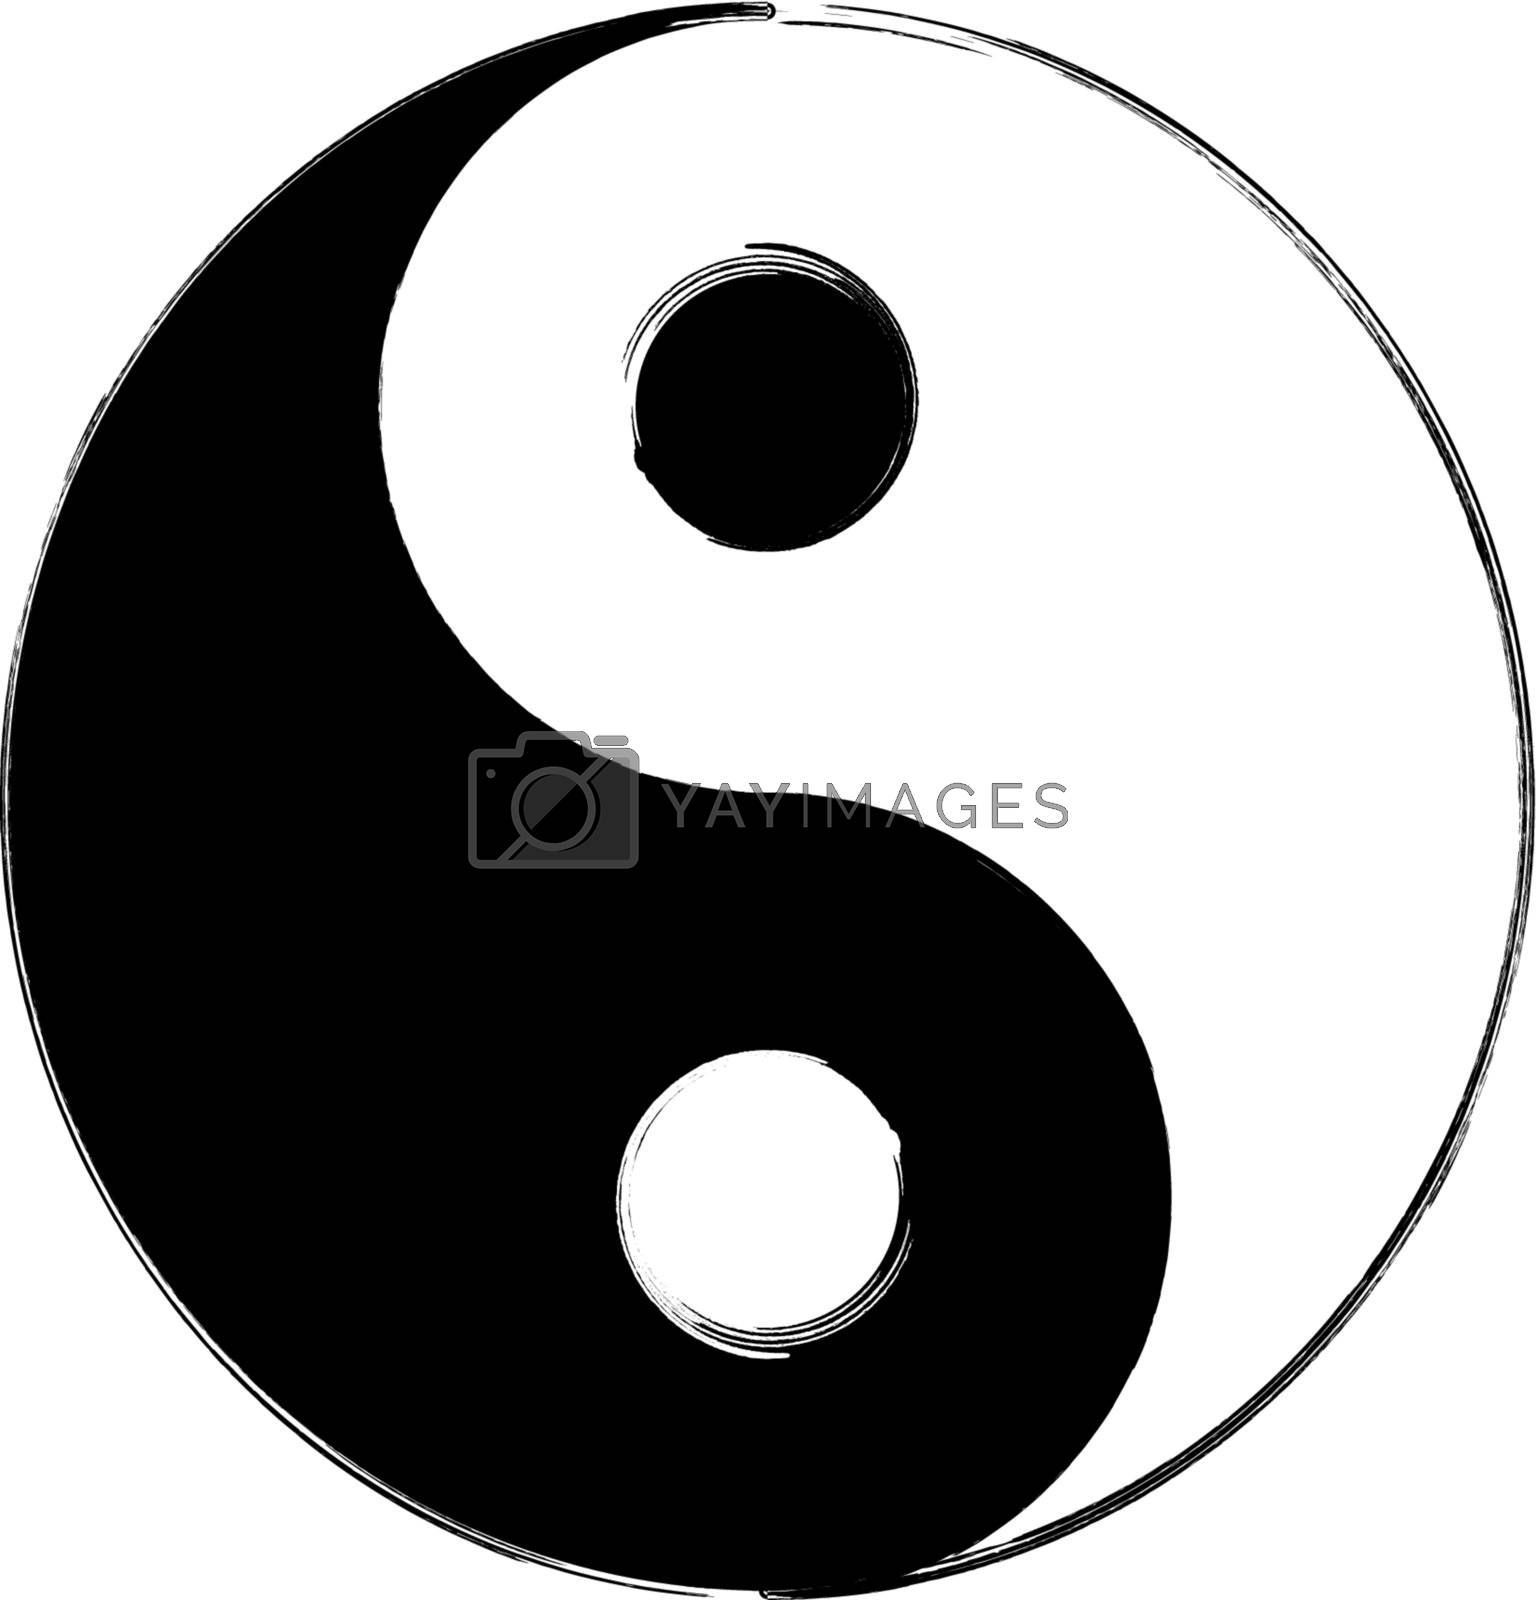 Royalty free image of Artistic yin-yang symbol by Diversphoto